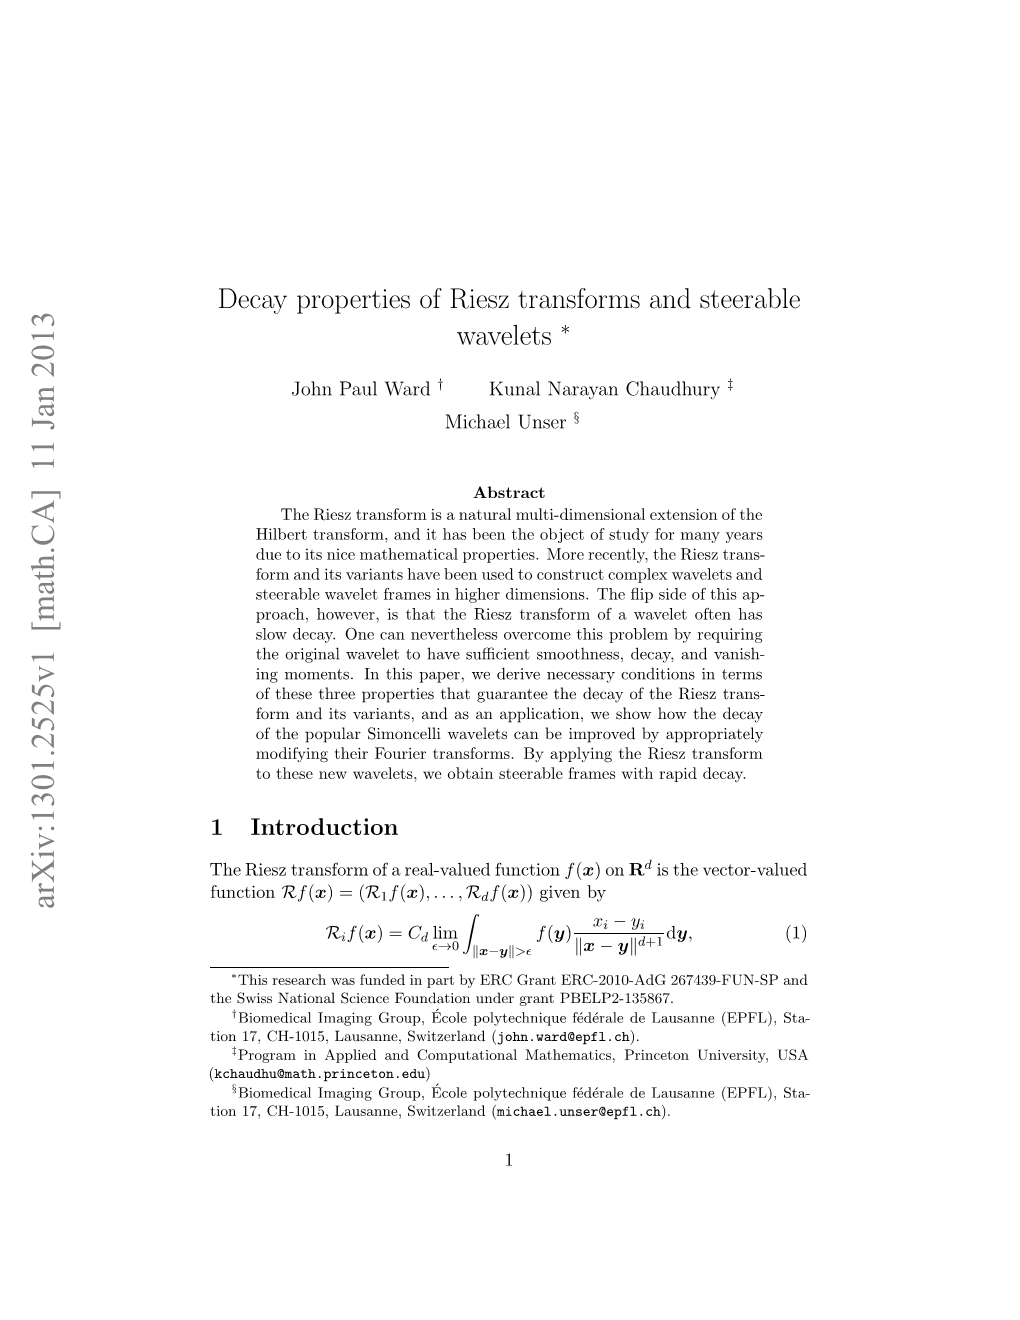 Decay Properties of Riesz Transforms and Steerable Wavelets